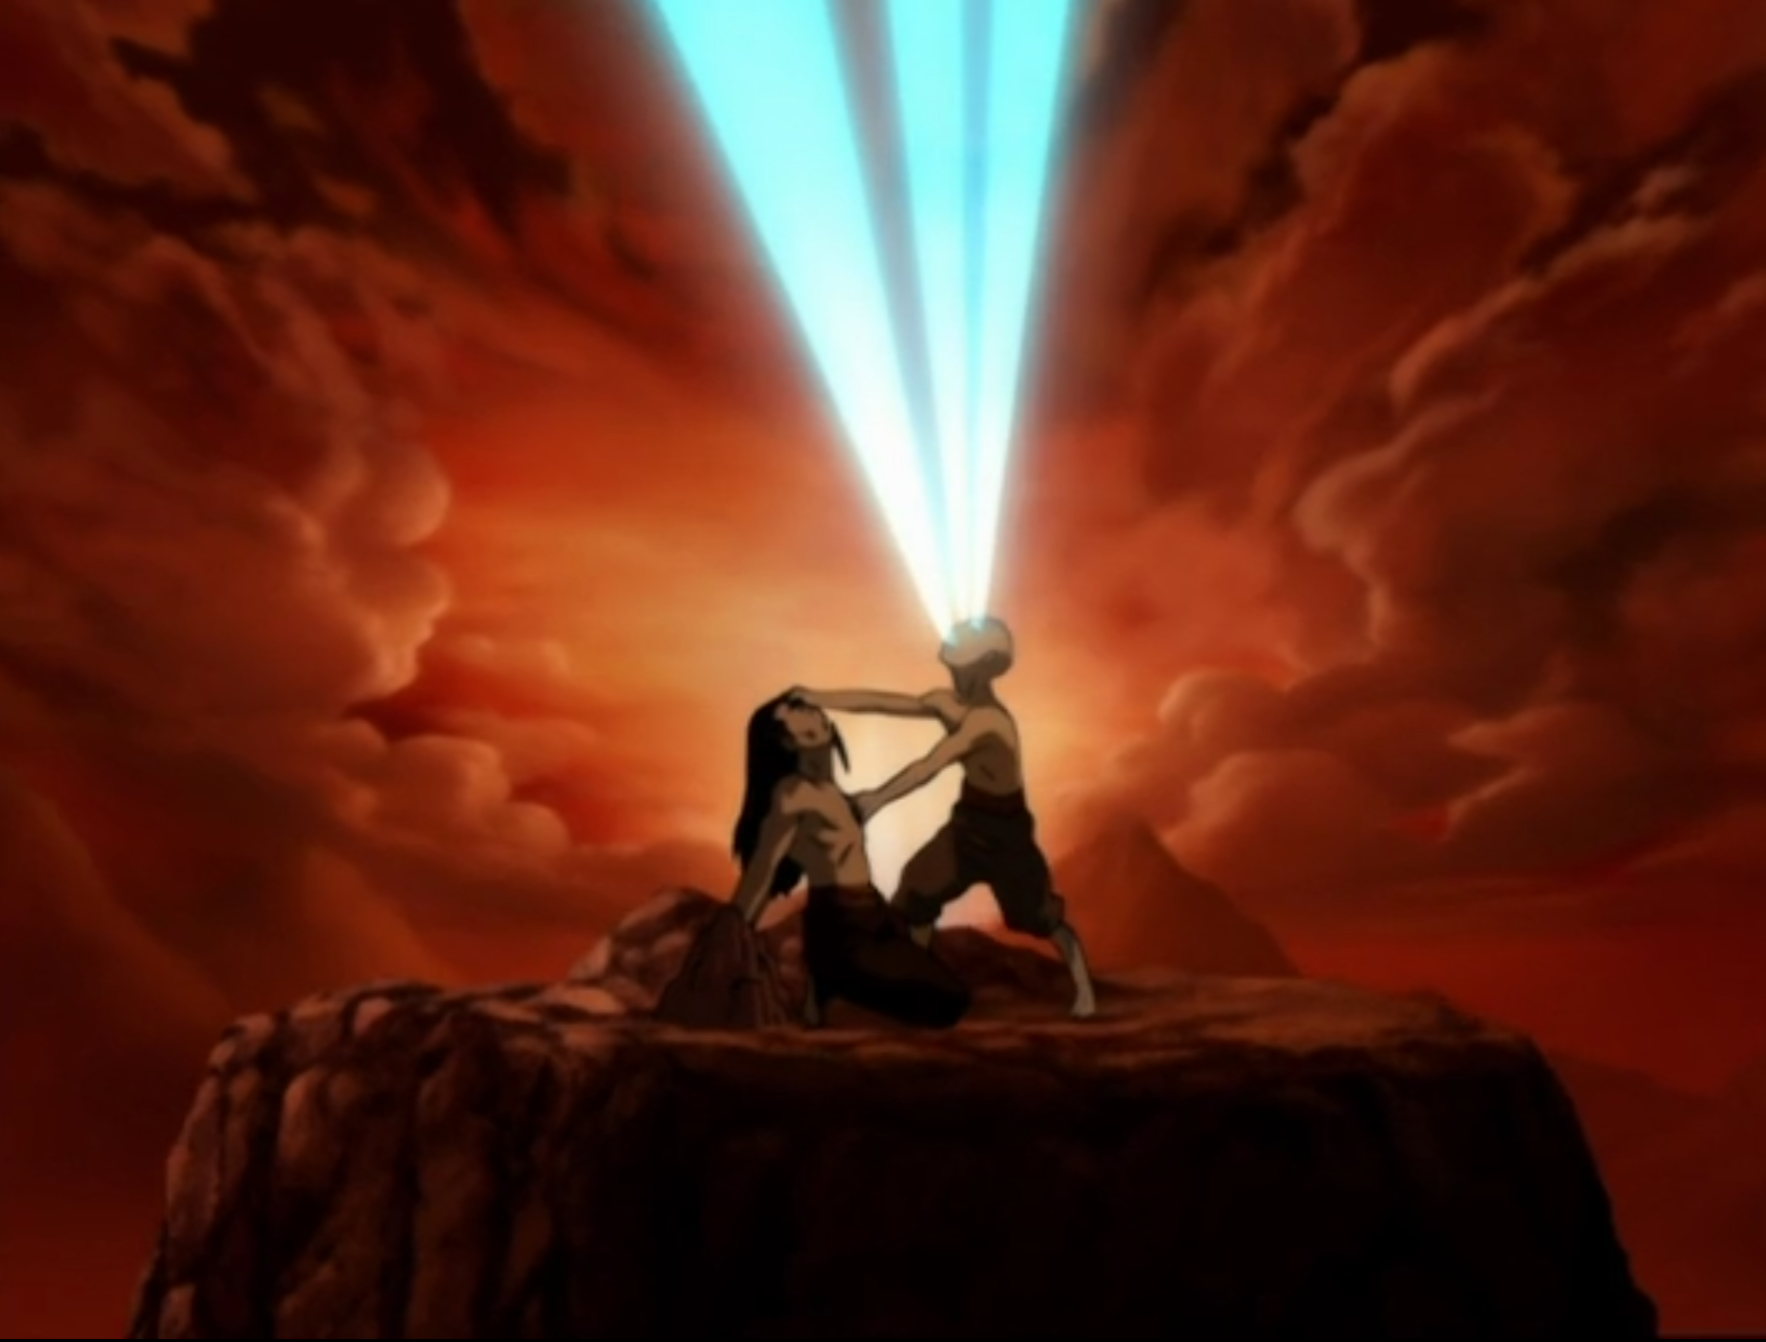 The Perfect Payoff of The Avatar The Last Airbender Finale